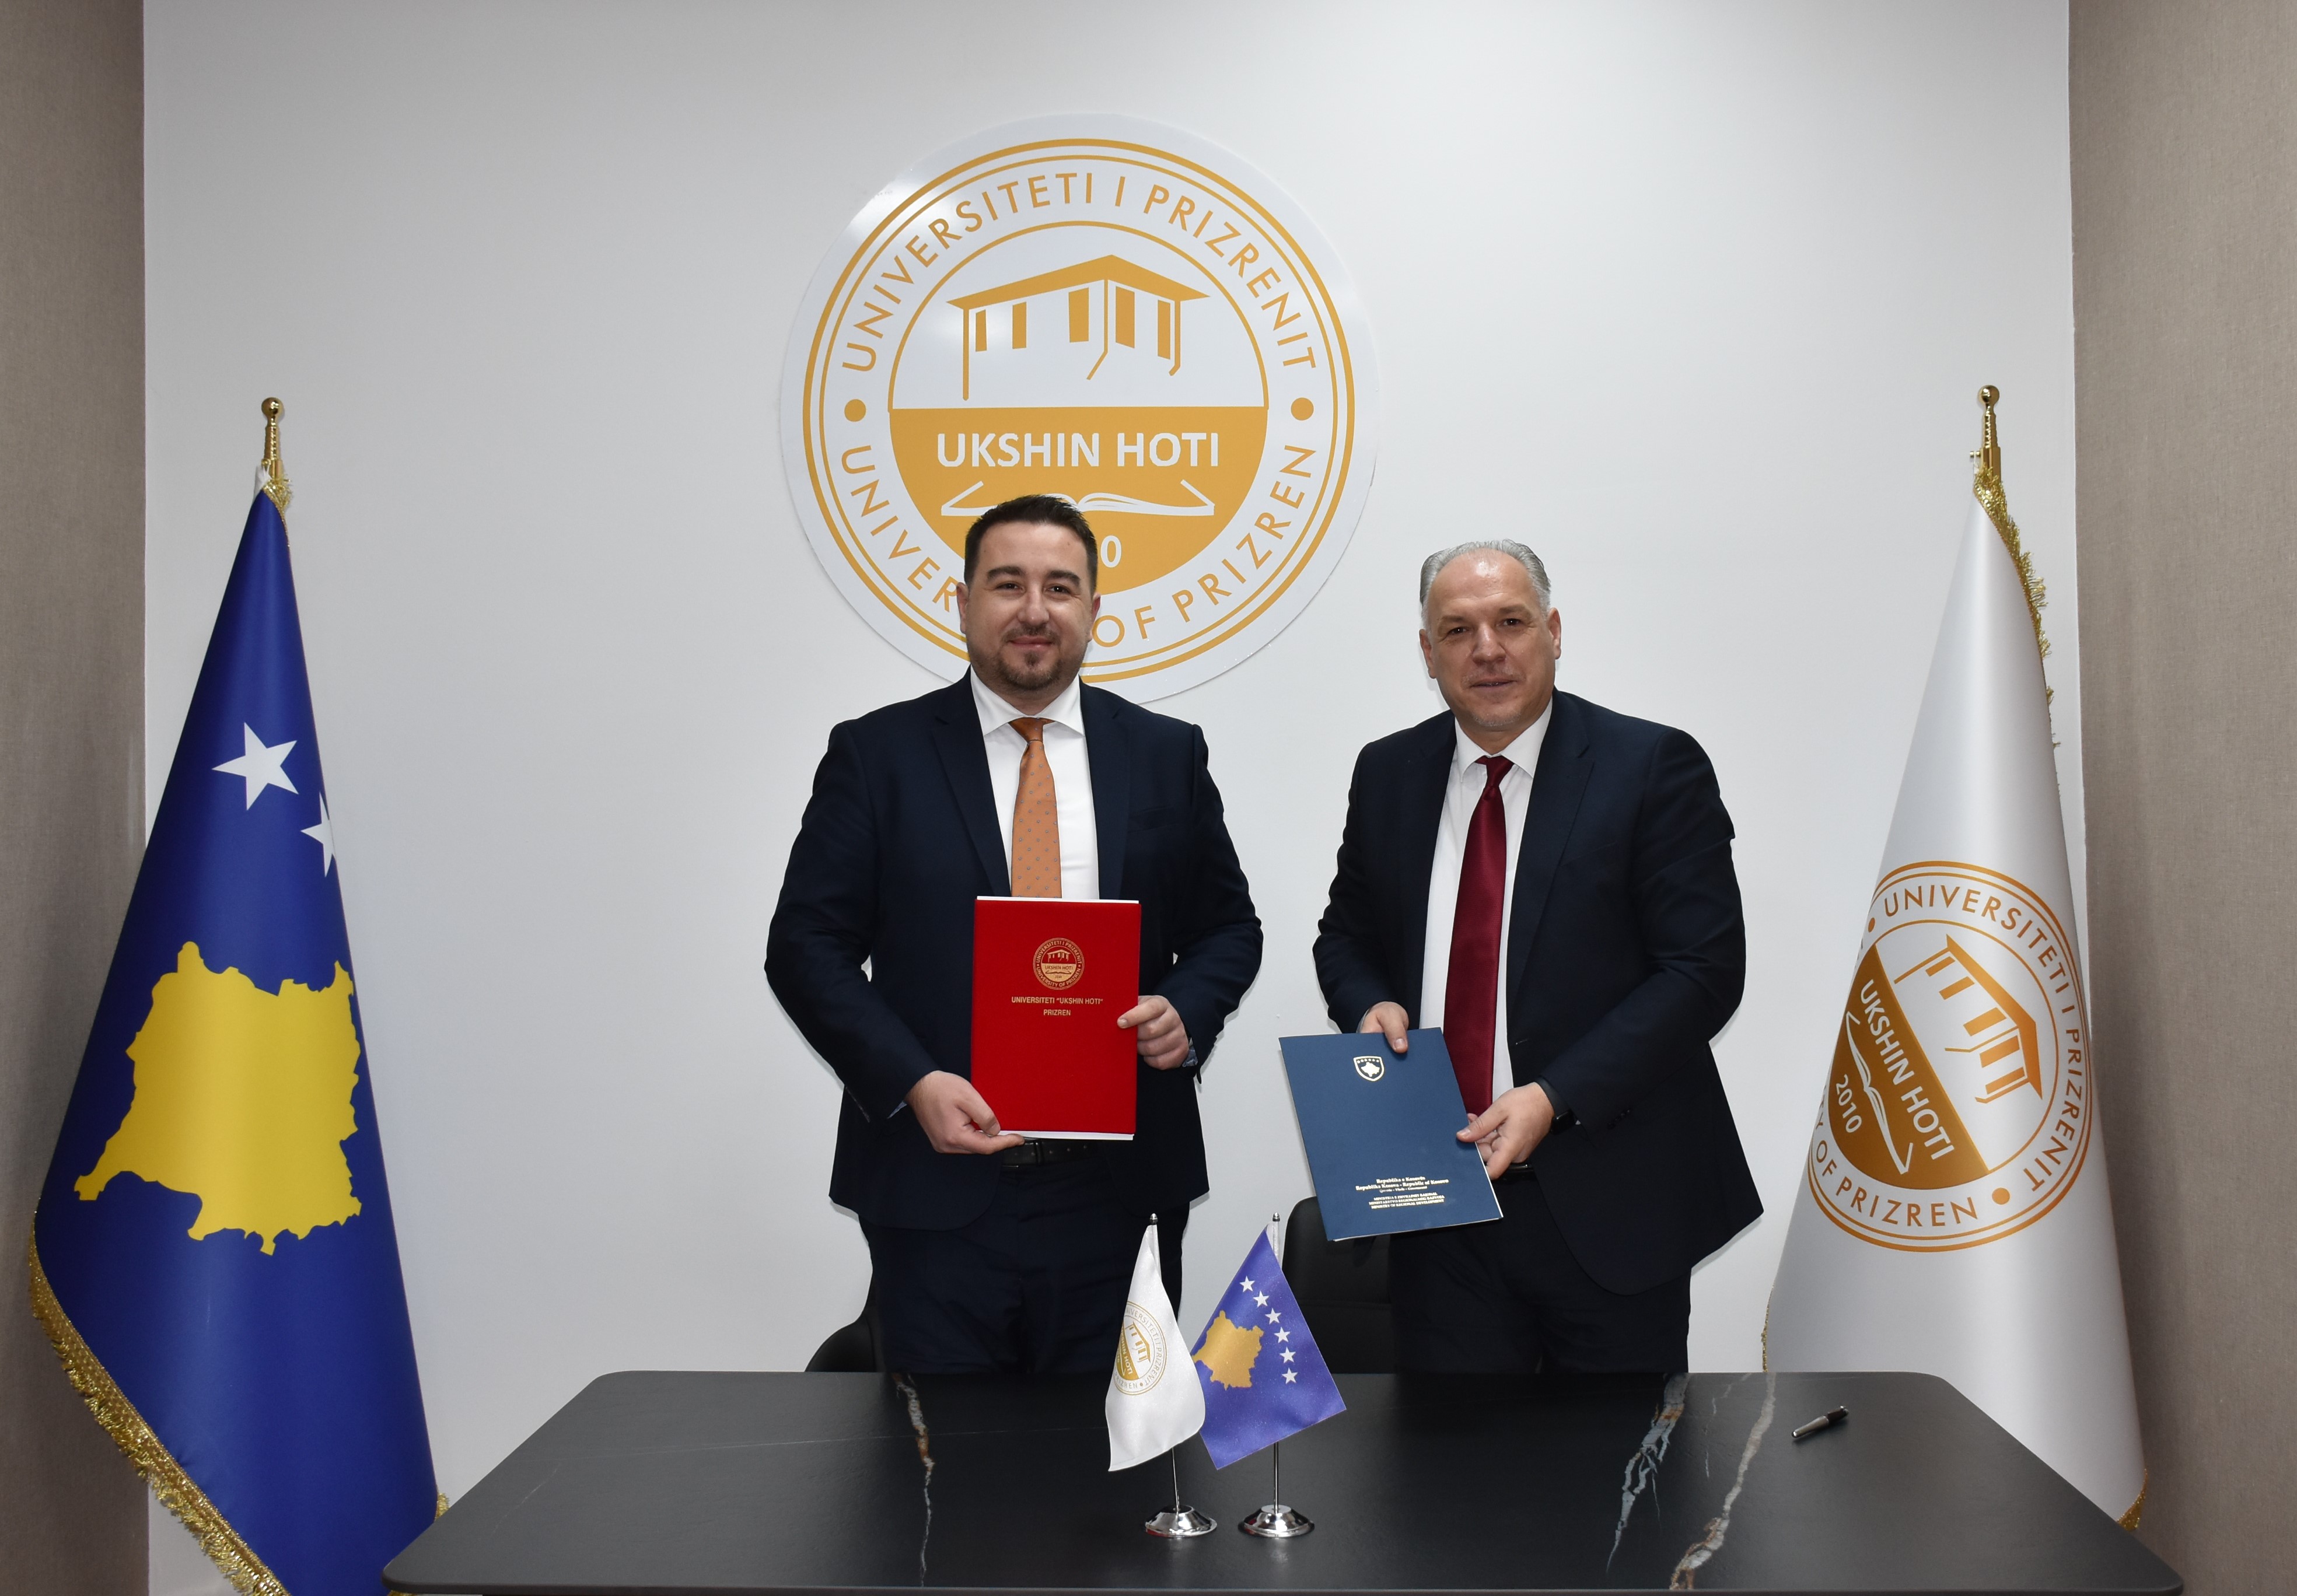 Ministry of Regional Development signs a Cooperation Agreement with “Ukshin Hoti” University in Prizren